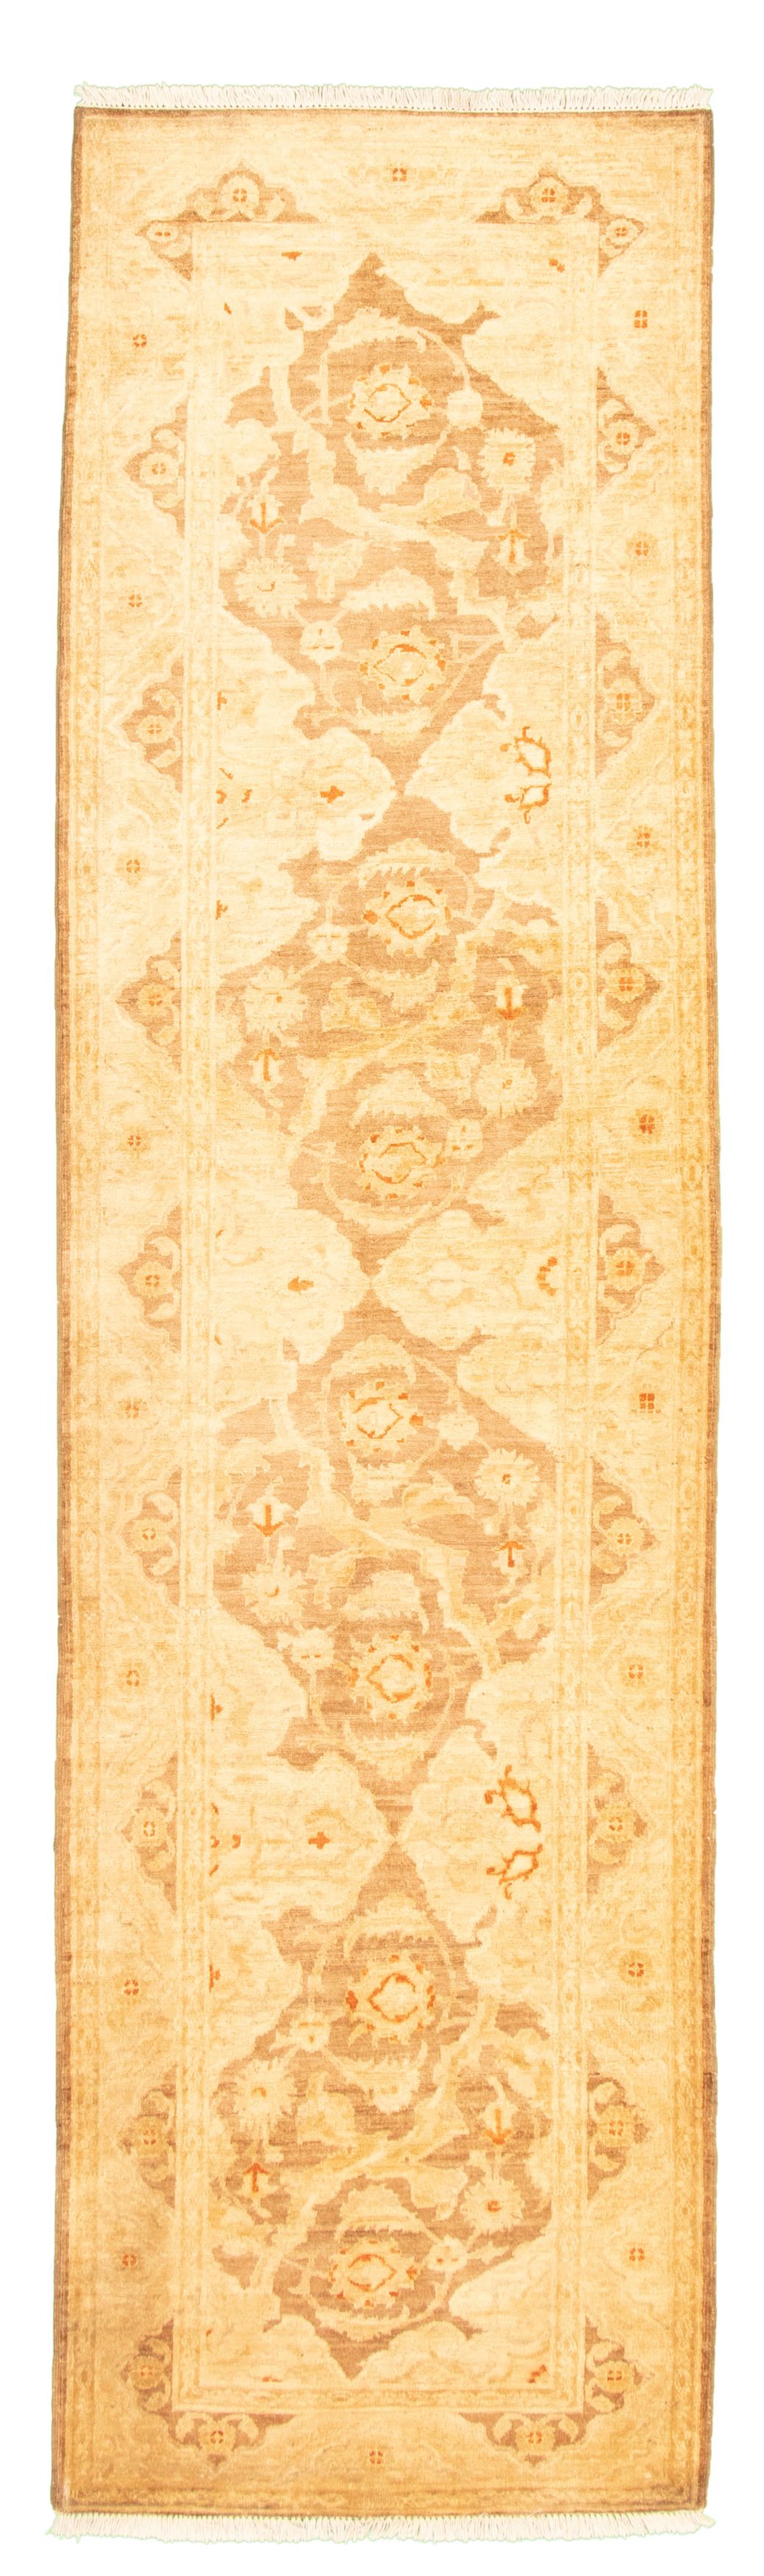 Hand-knotted Peshawar Oushak Brown, Ivory Wool Rug 3'0" x 11'5" Size: 3'0" x 11'5"  